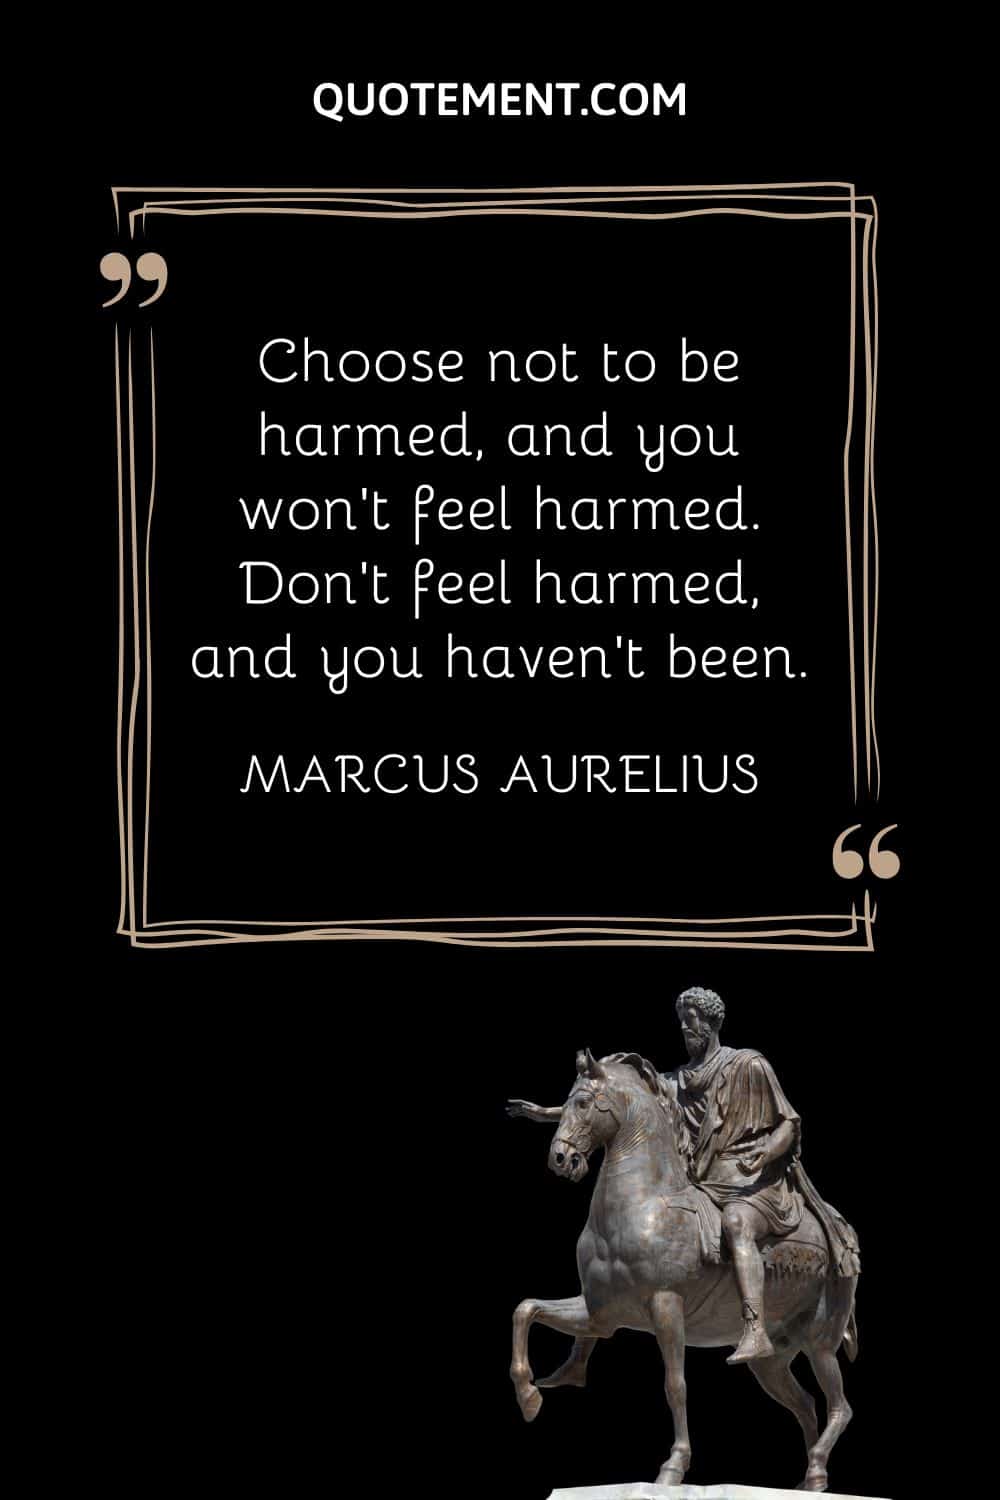 “Choose not to be harmed, and you won’t feel harmed. Don’t feel harmed, and you haven’t been.” — Marcus Aurelius